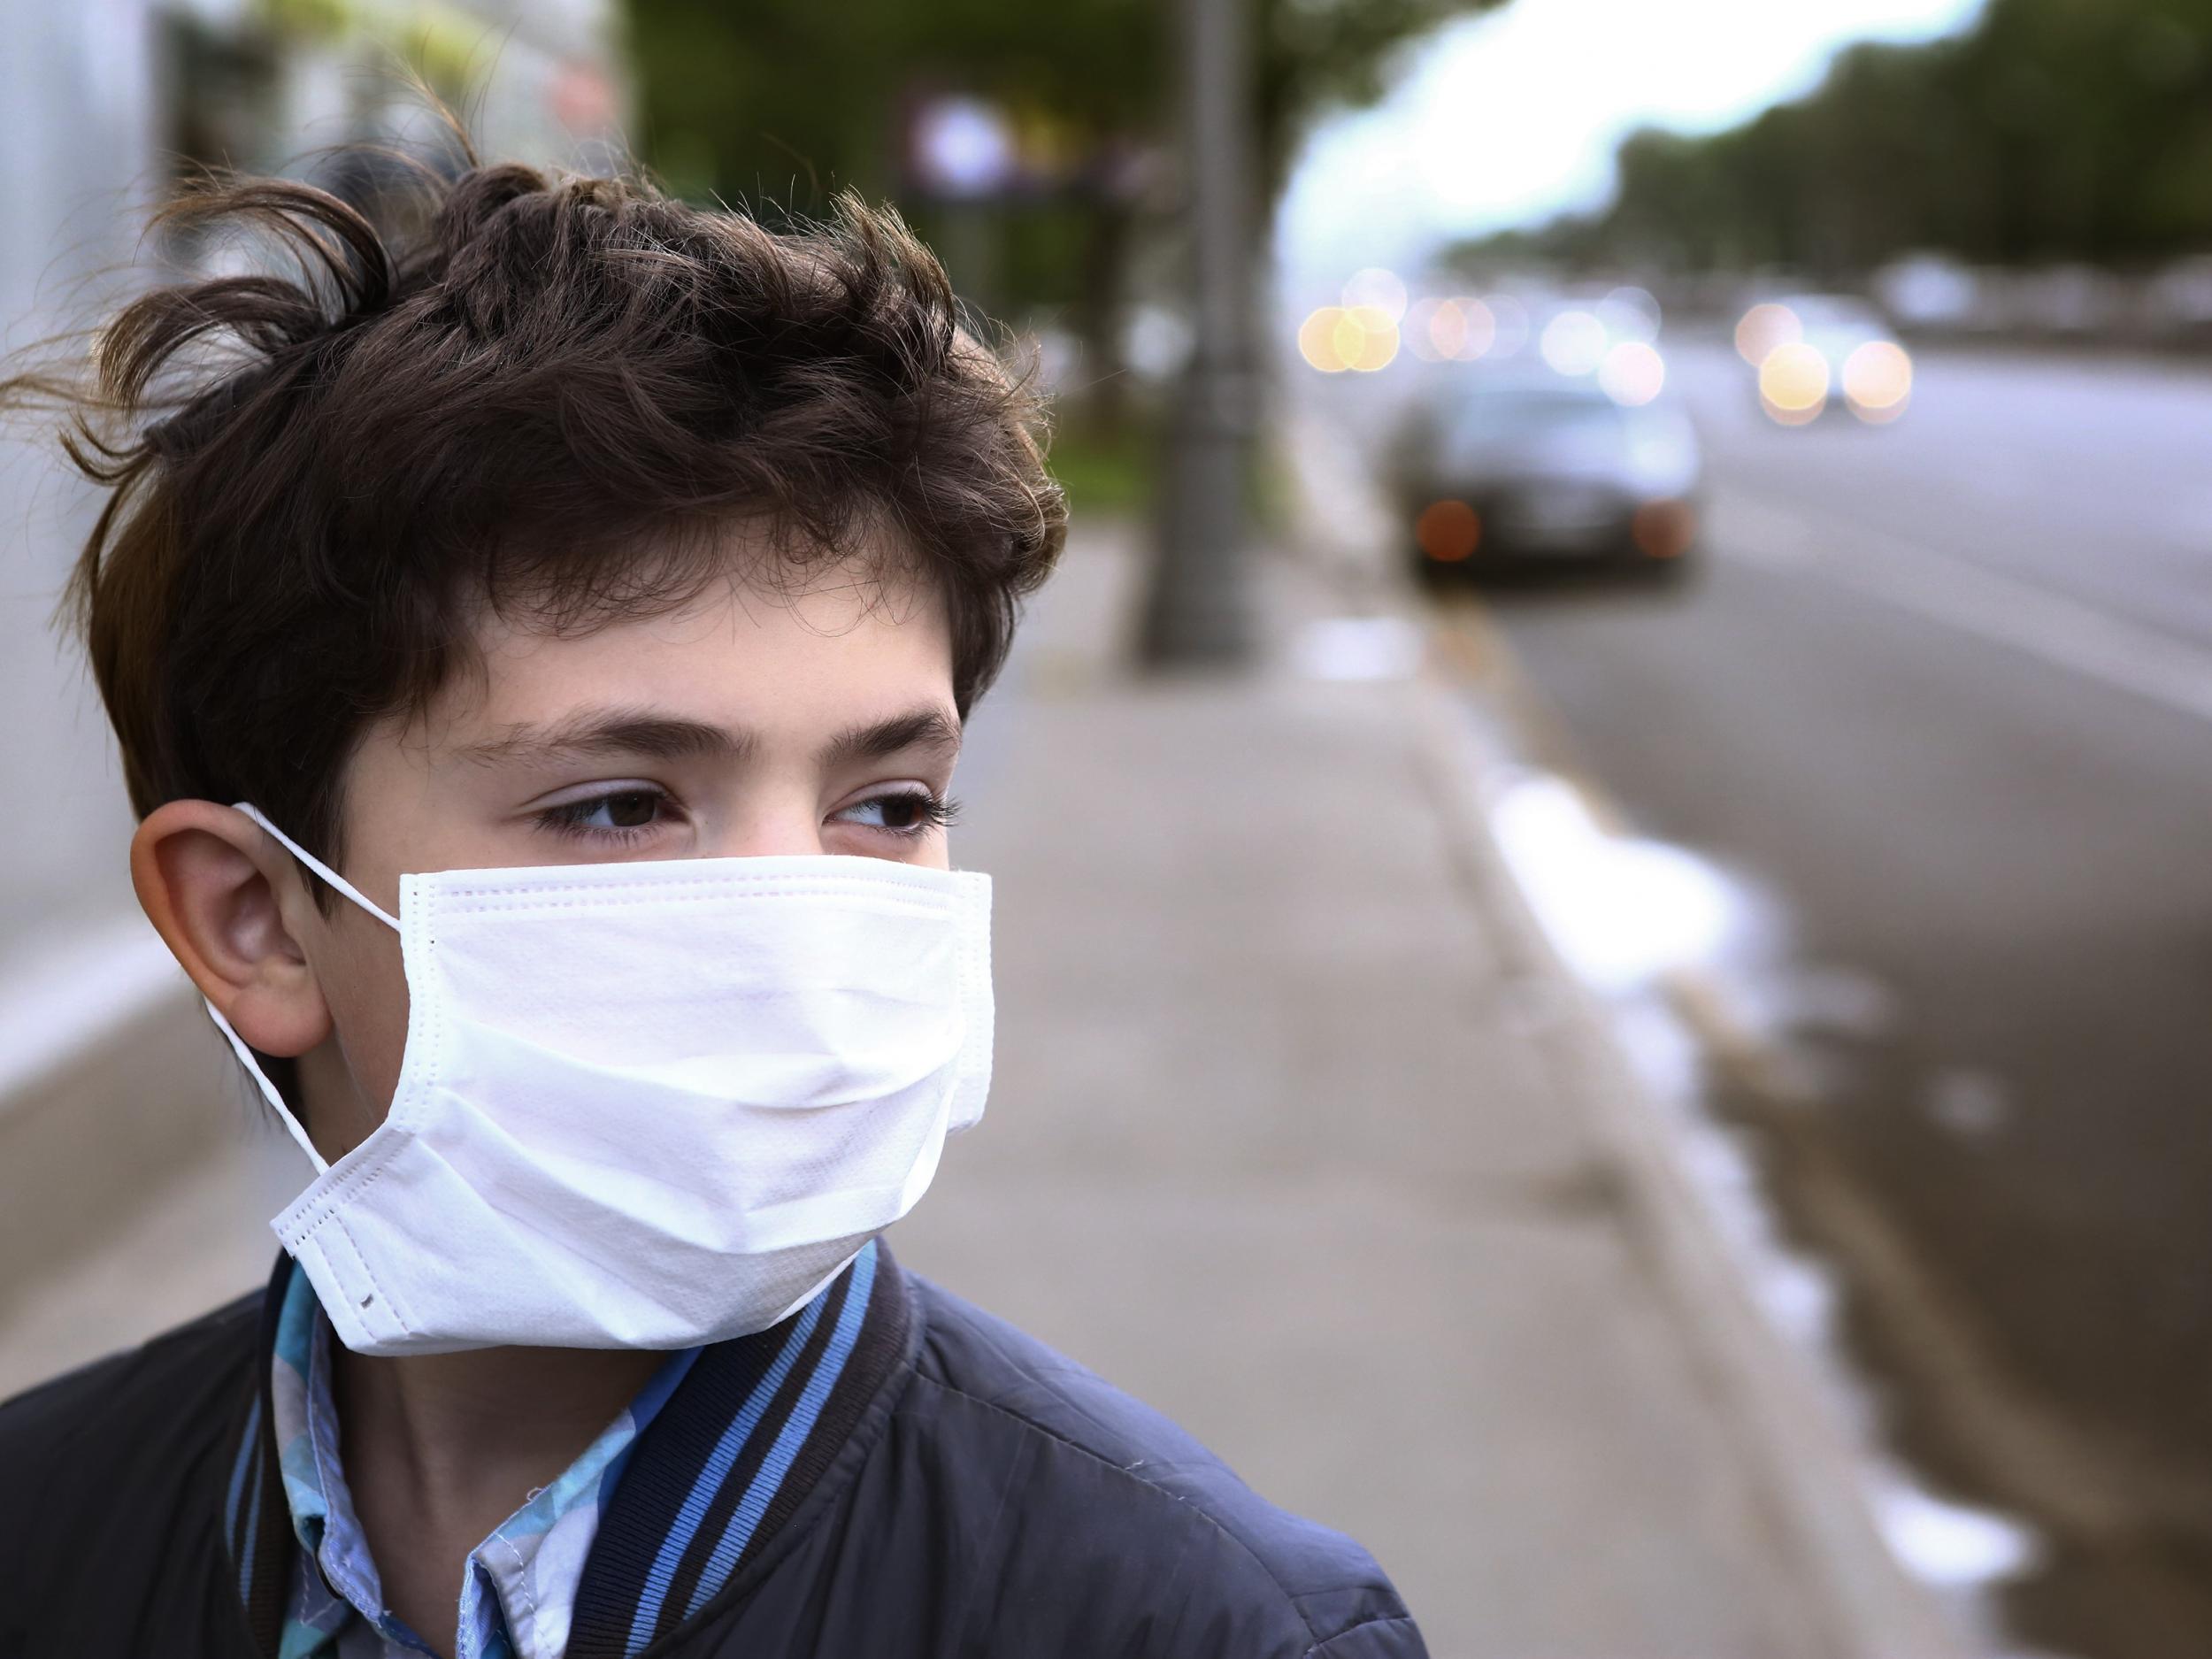 Air pollution has been linked to heart problems as well as psychosis symptoms in young adults